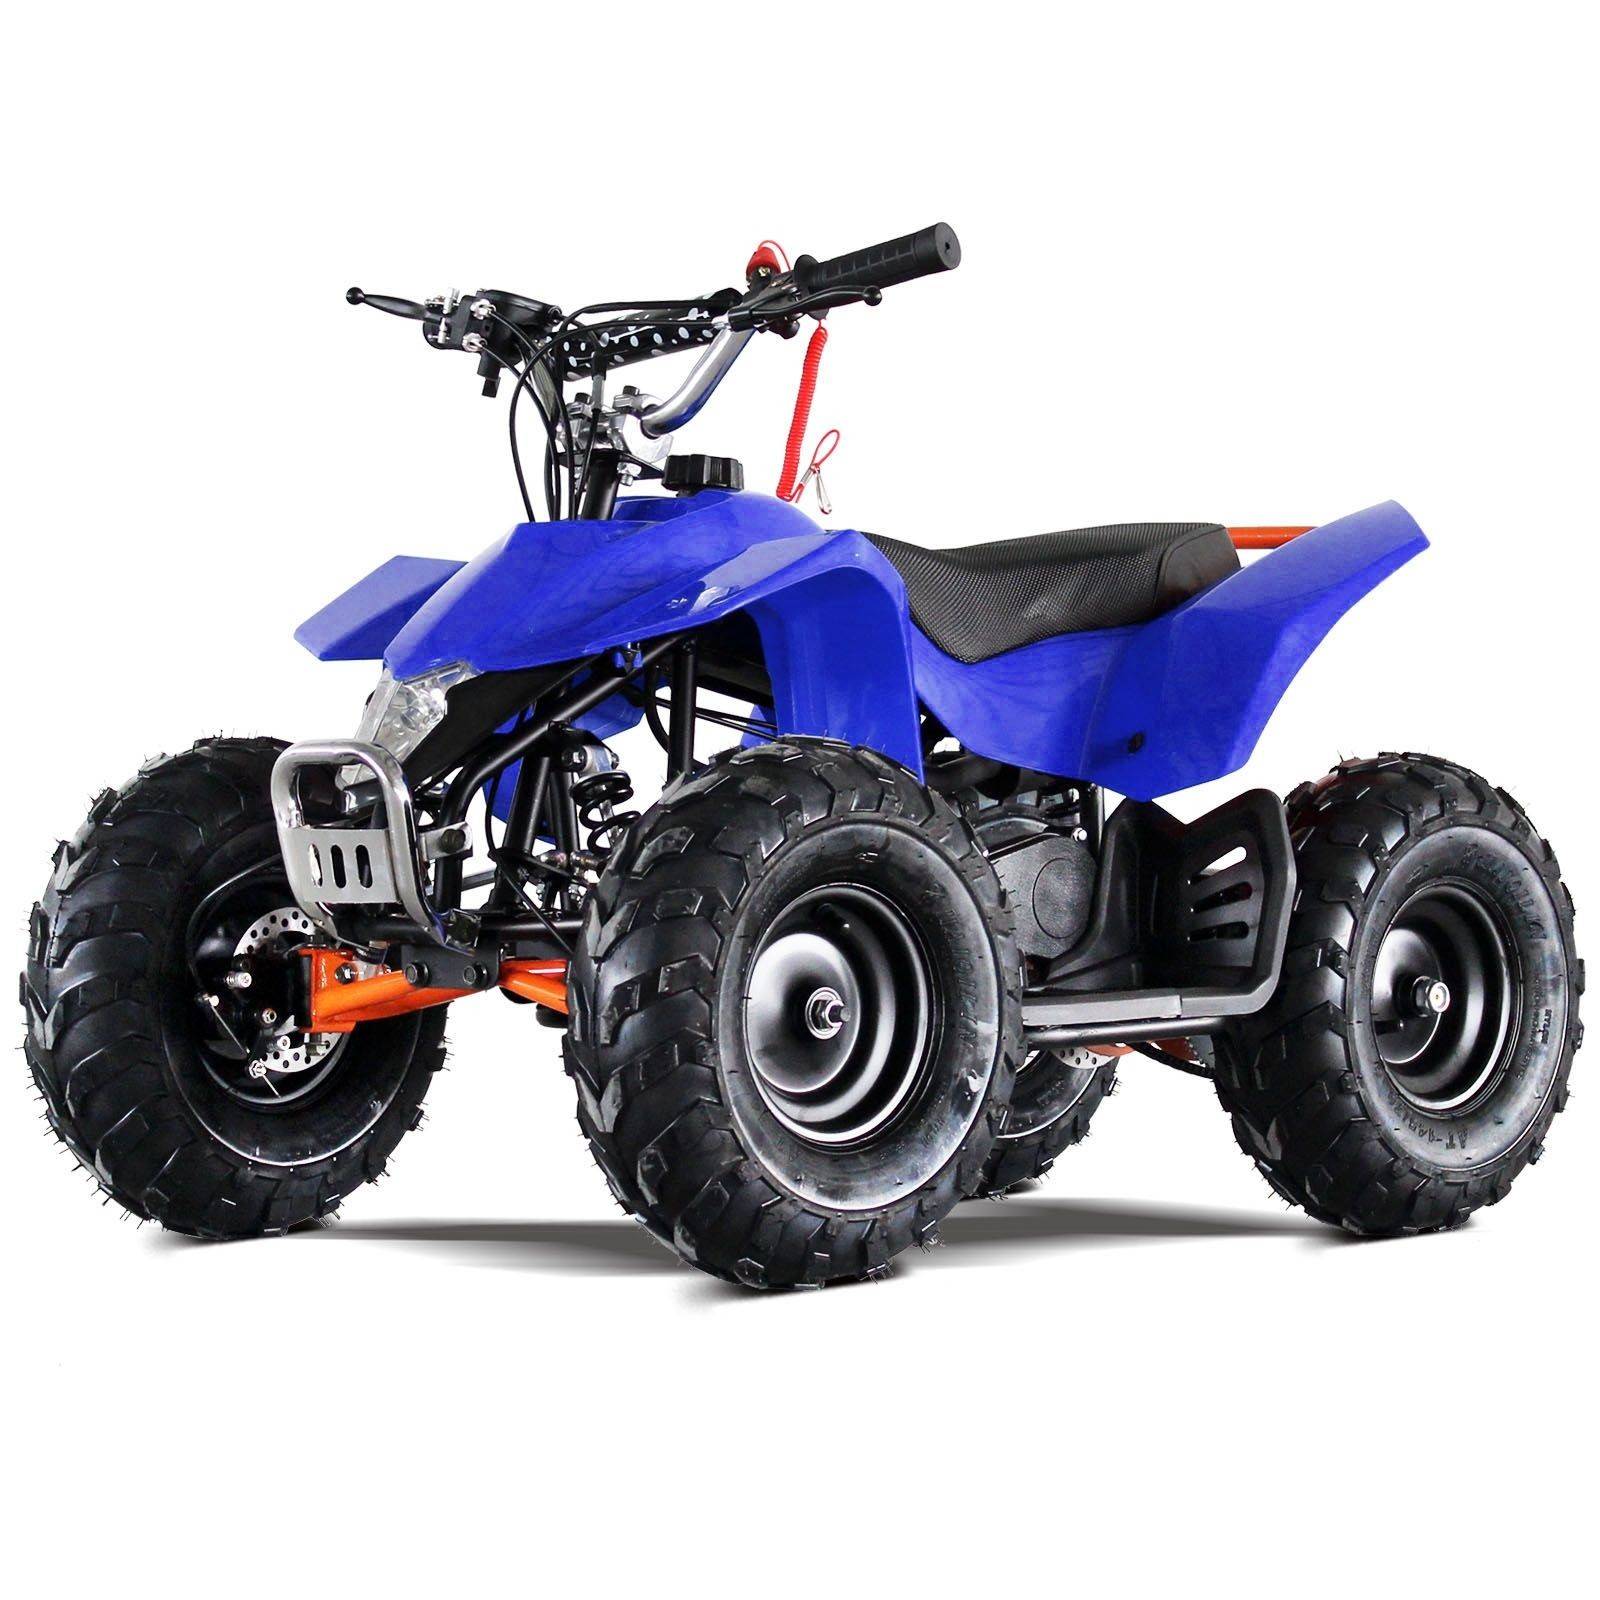 50cc Mini ATV Star High Power Two-Stroke Big Size 14.5 Real Off Road Tire, front and rear coil suspension | redfoxpowersports